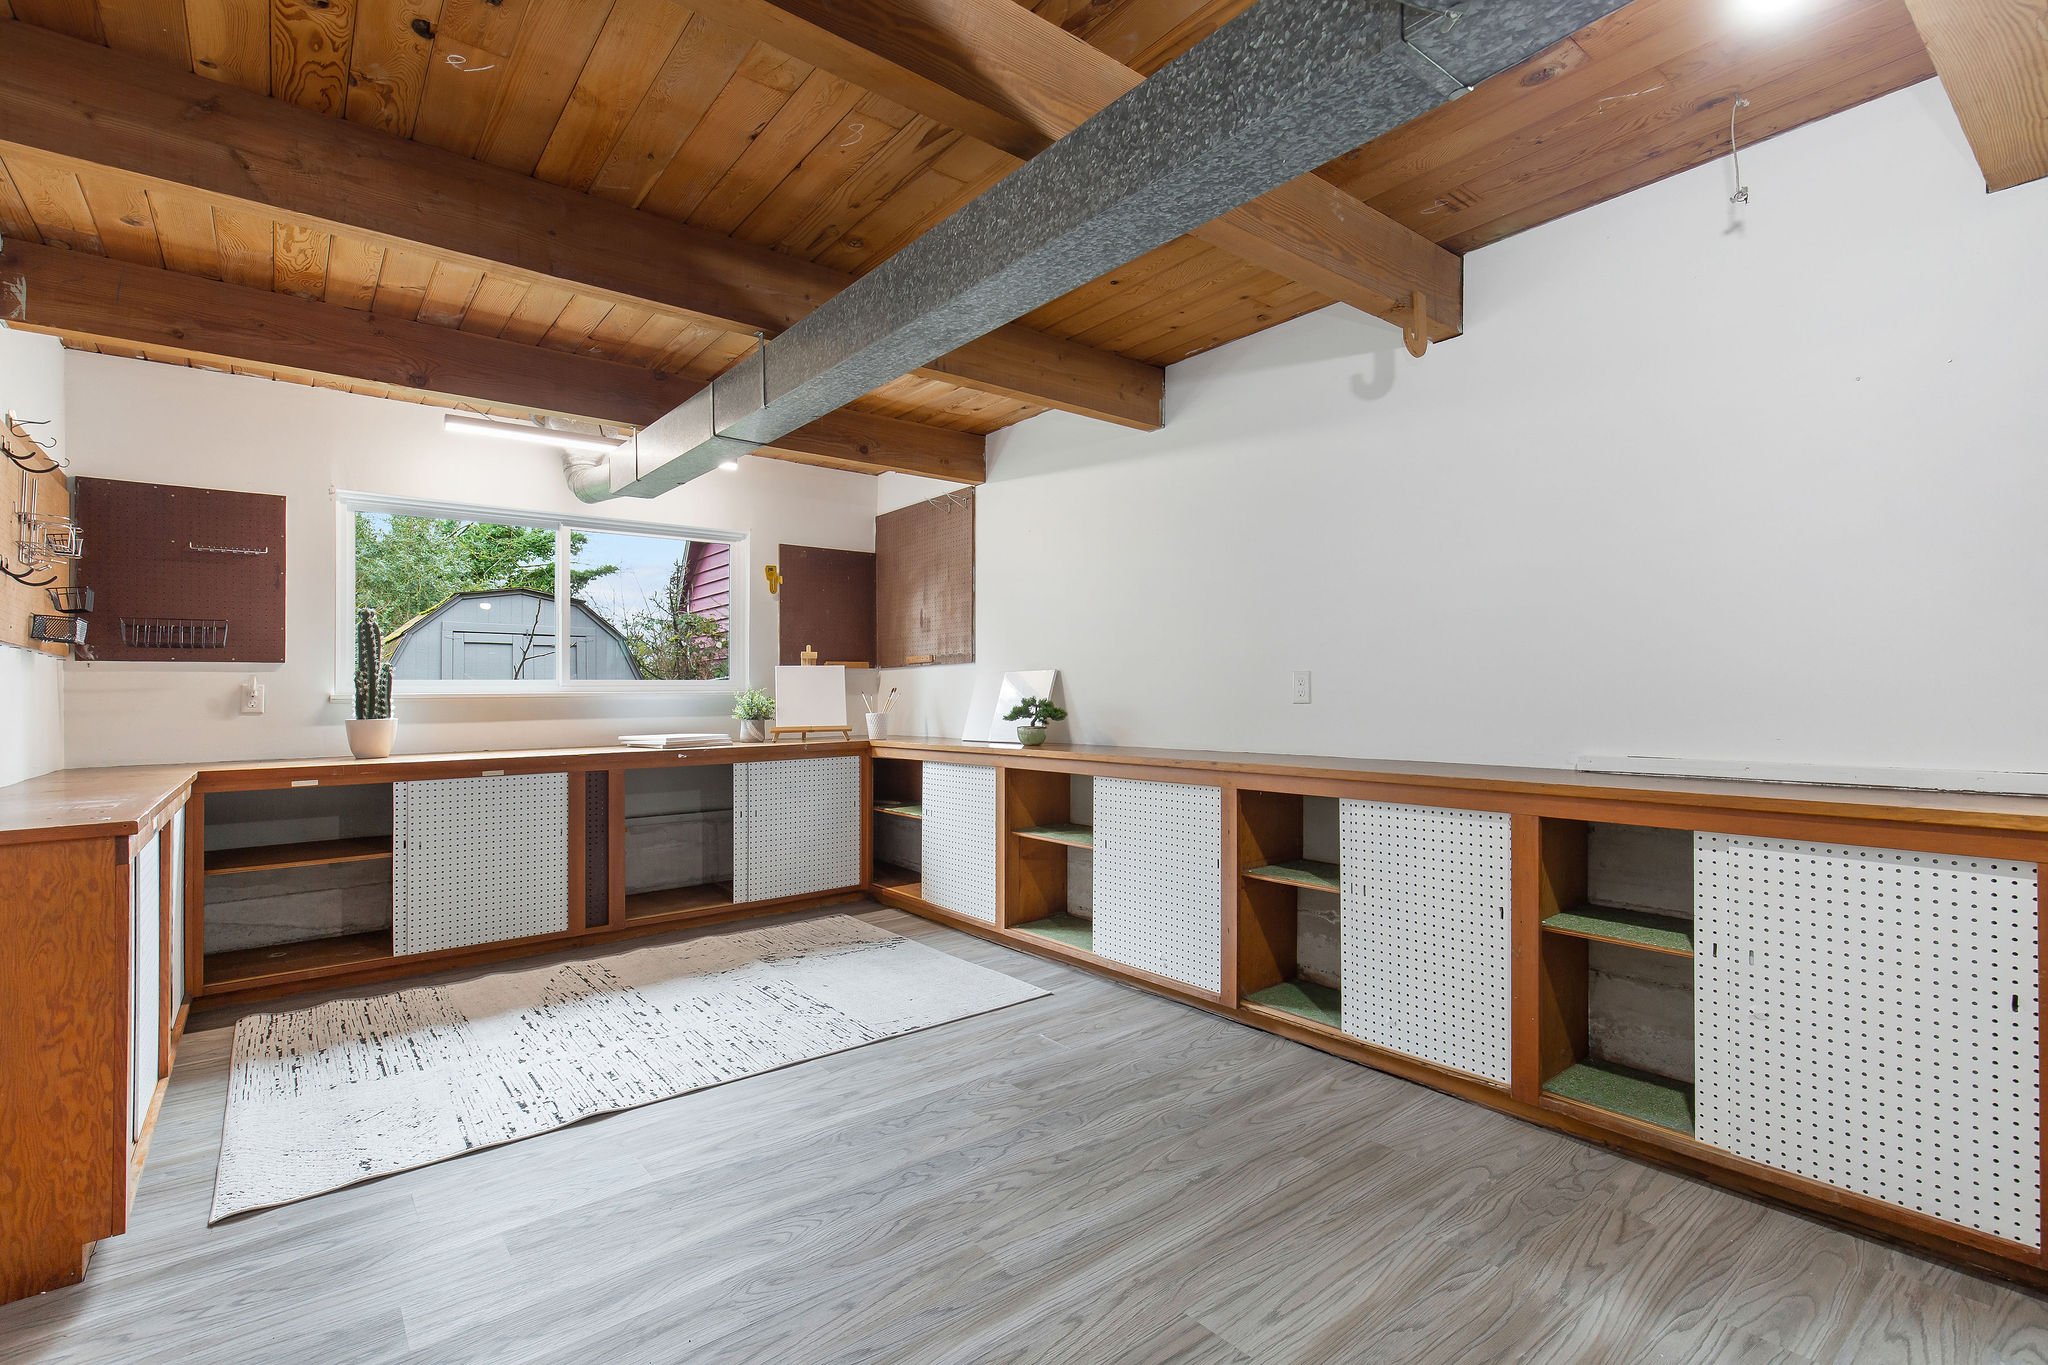  image description: interior of garage with wooden countertops and window 